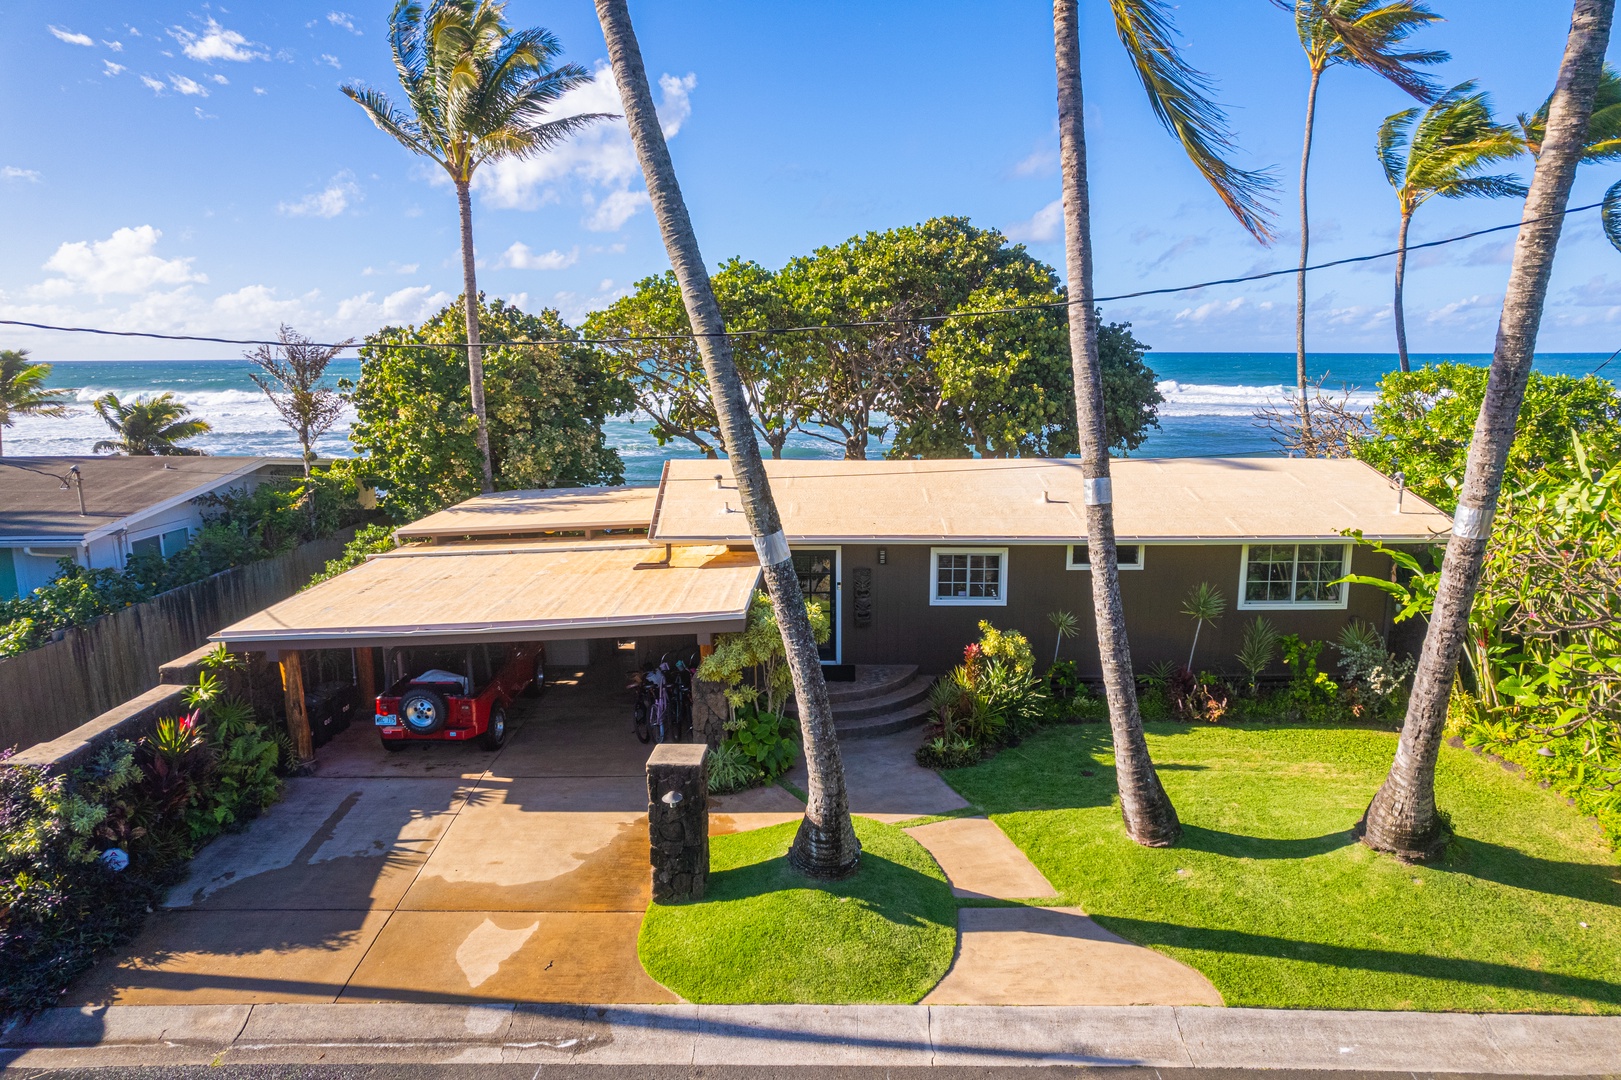 Haleiwa Vacation Rentals, Sunset Point Hawaiian Beachfront** - Aerial shot of your home.